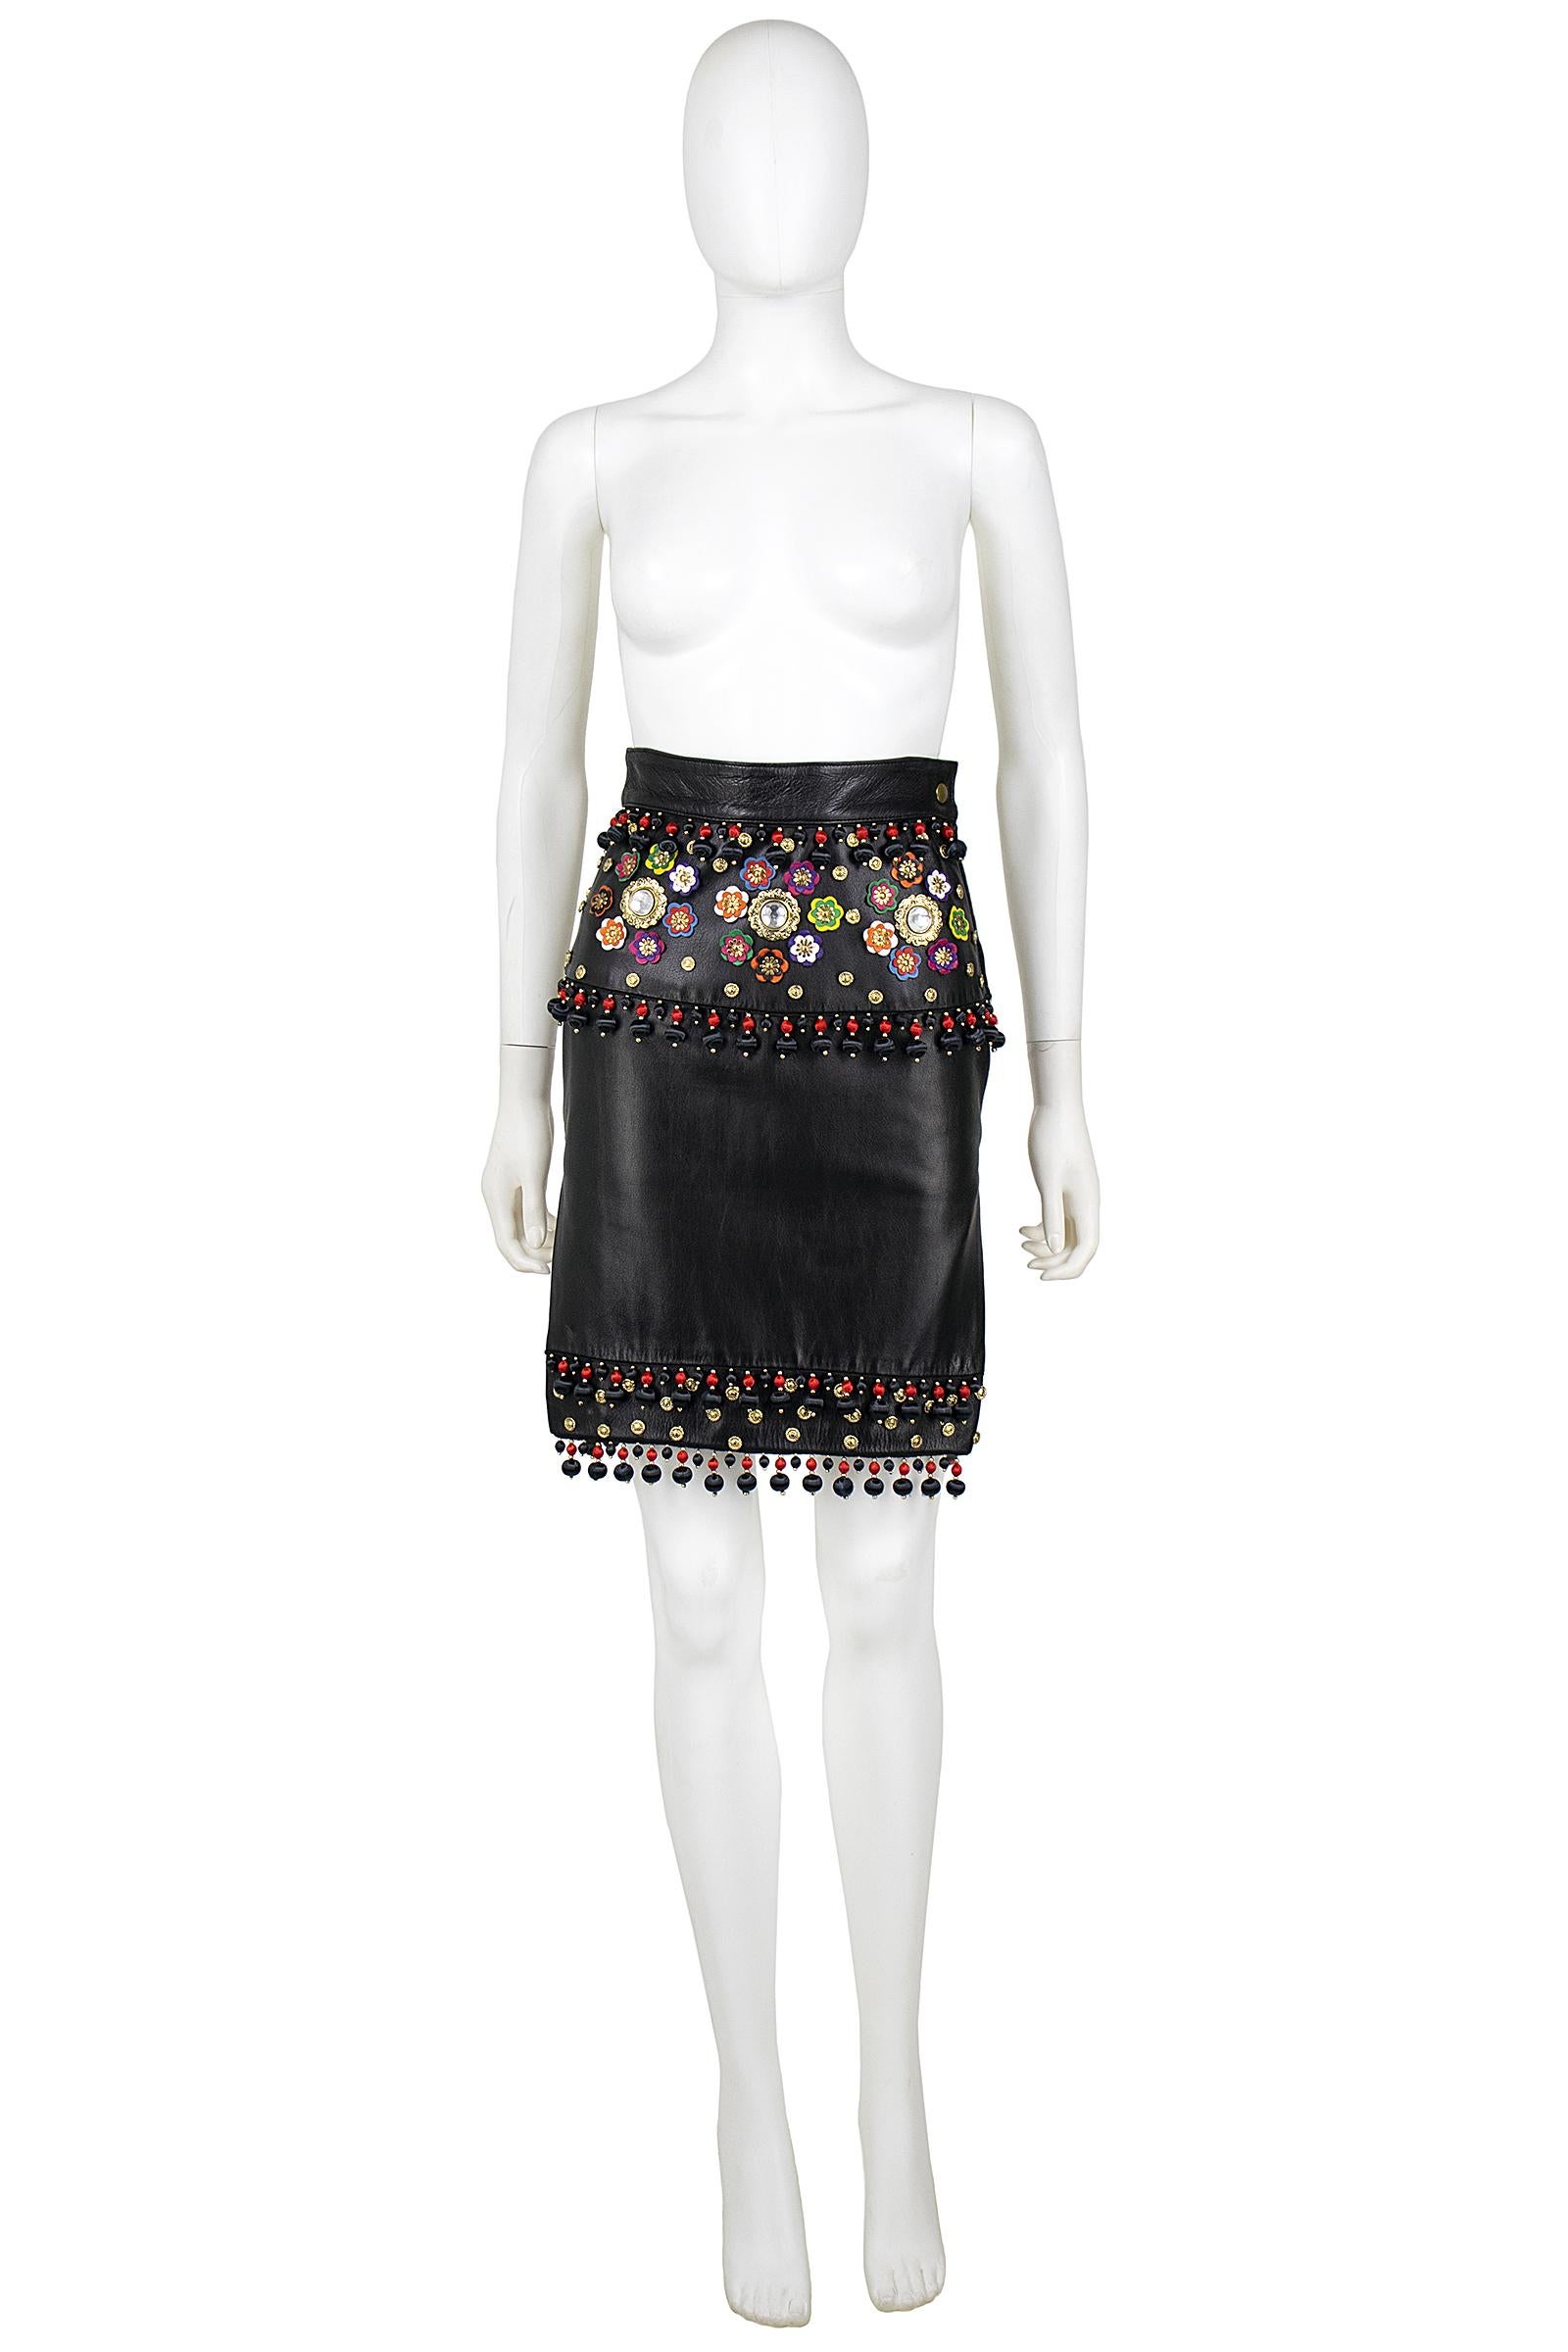 Moschino Circa 1990s Black Leather Skirt with Tassels, Metal Studs and Flowers For Sale 3